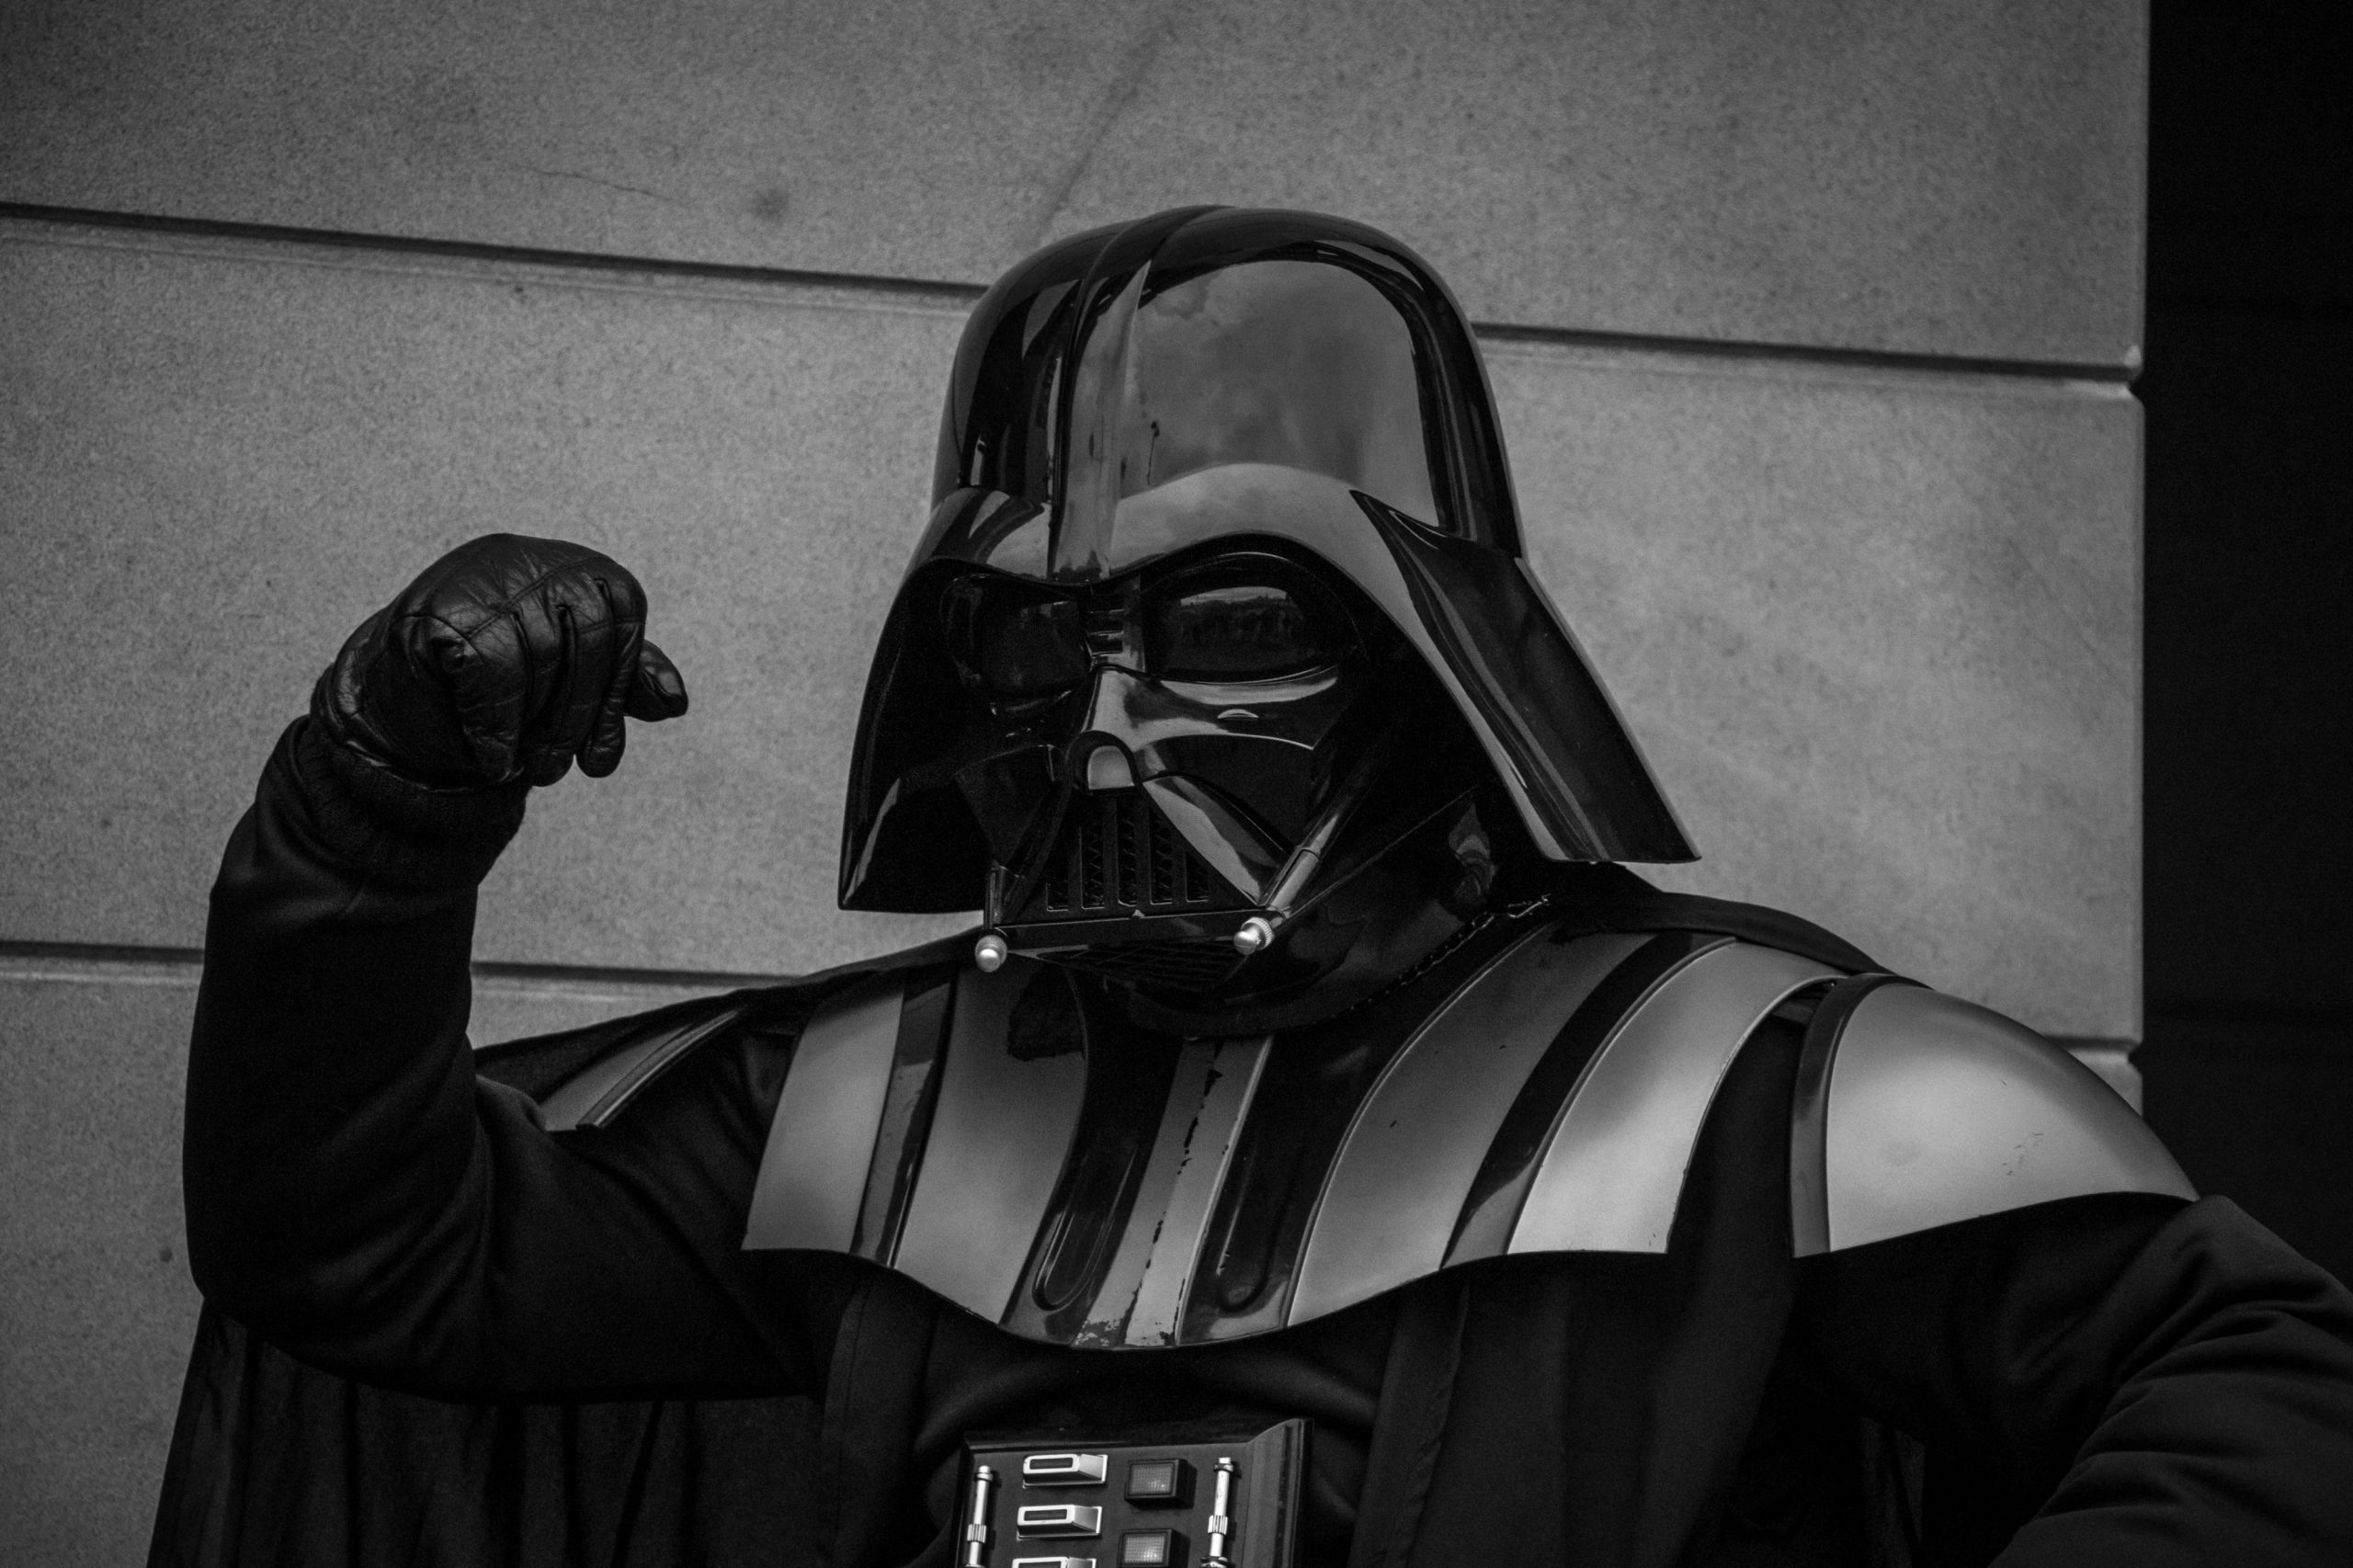 Darth Vader Star Wars is the very famous fictional